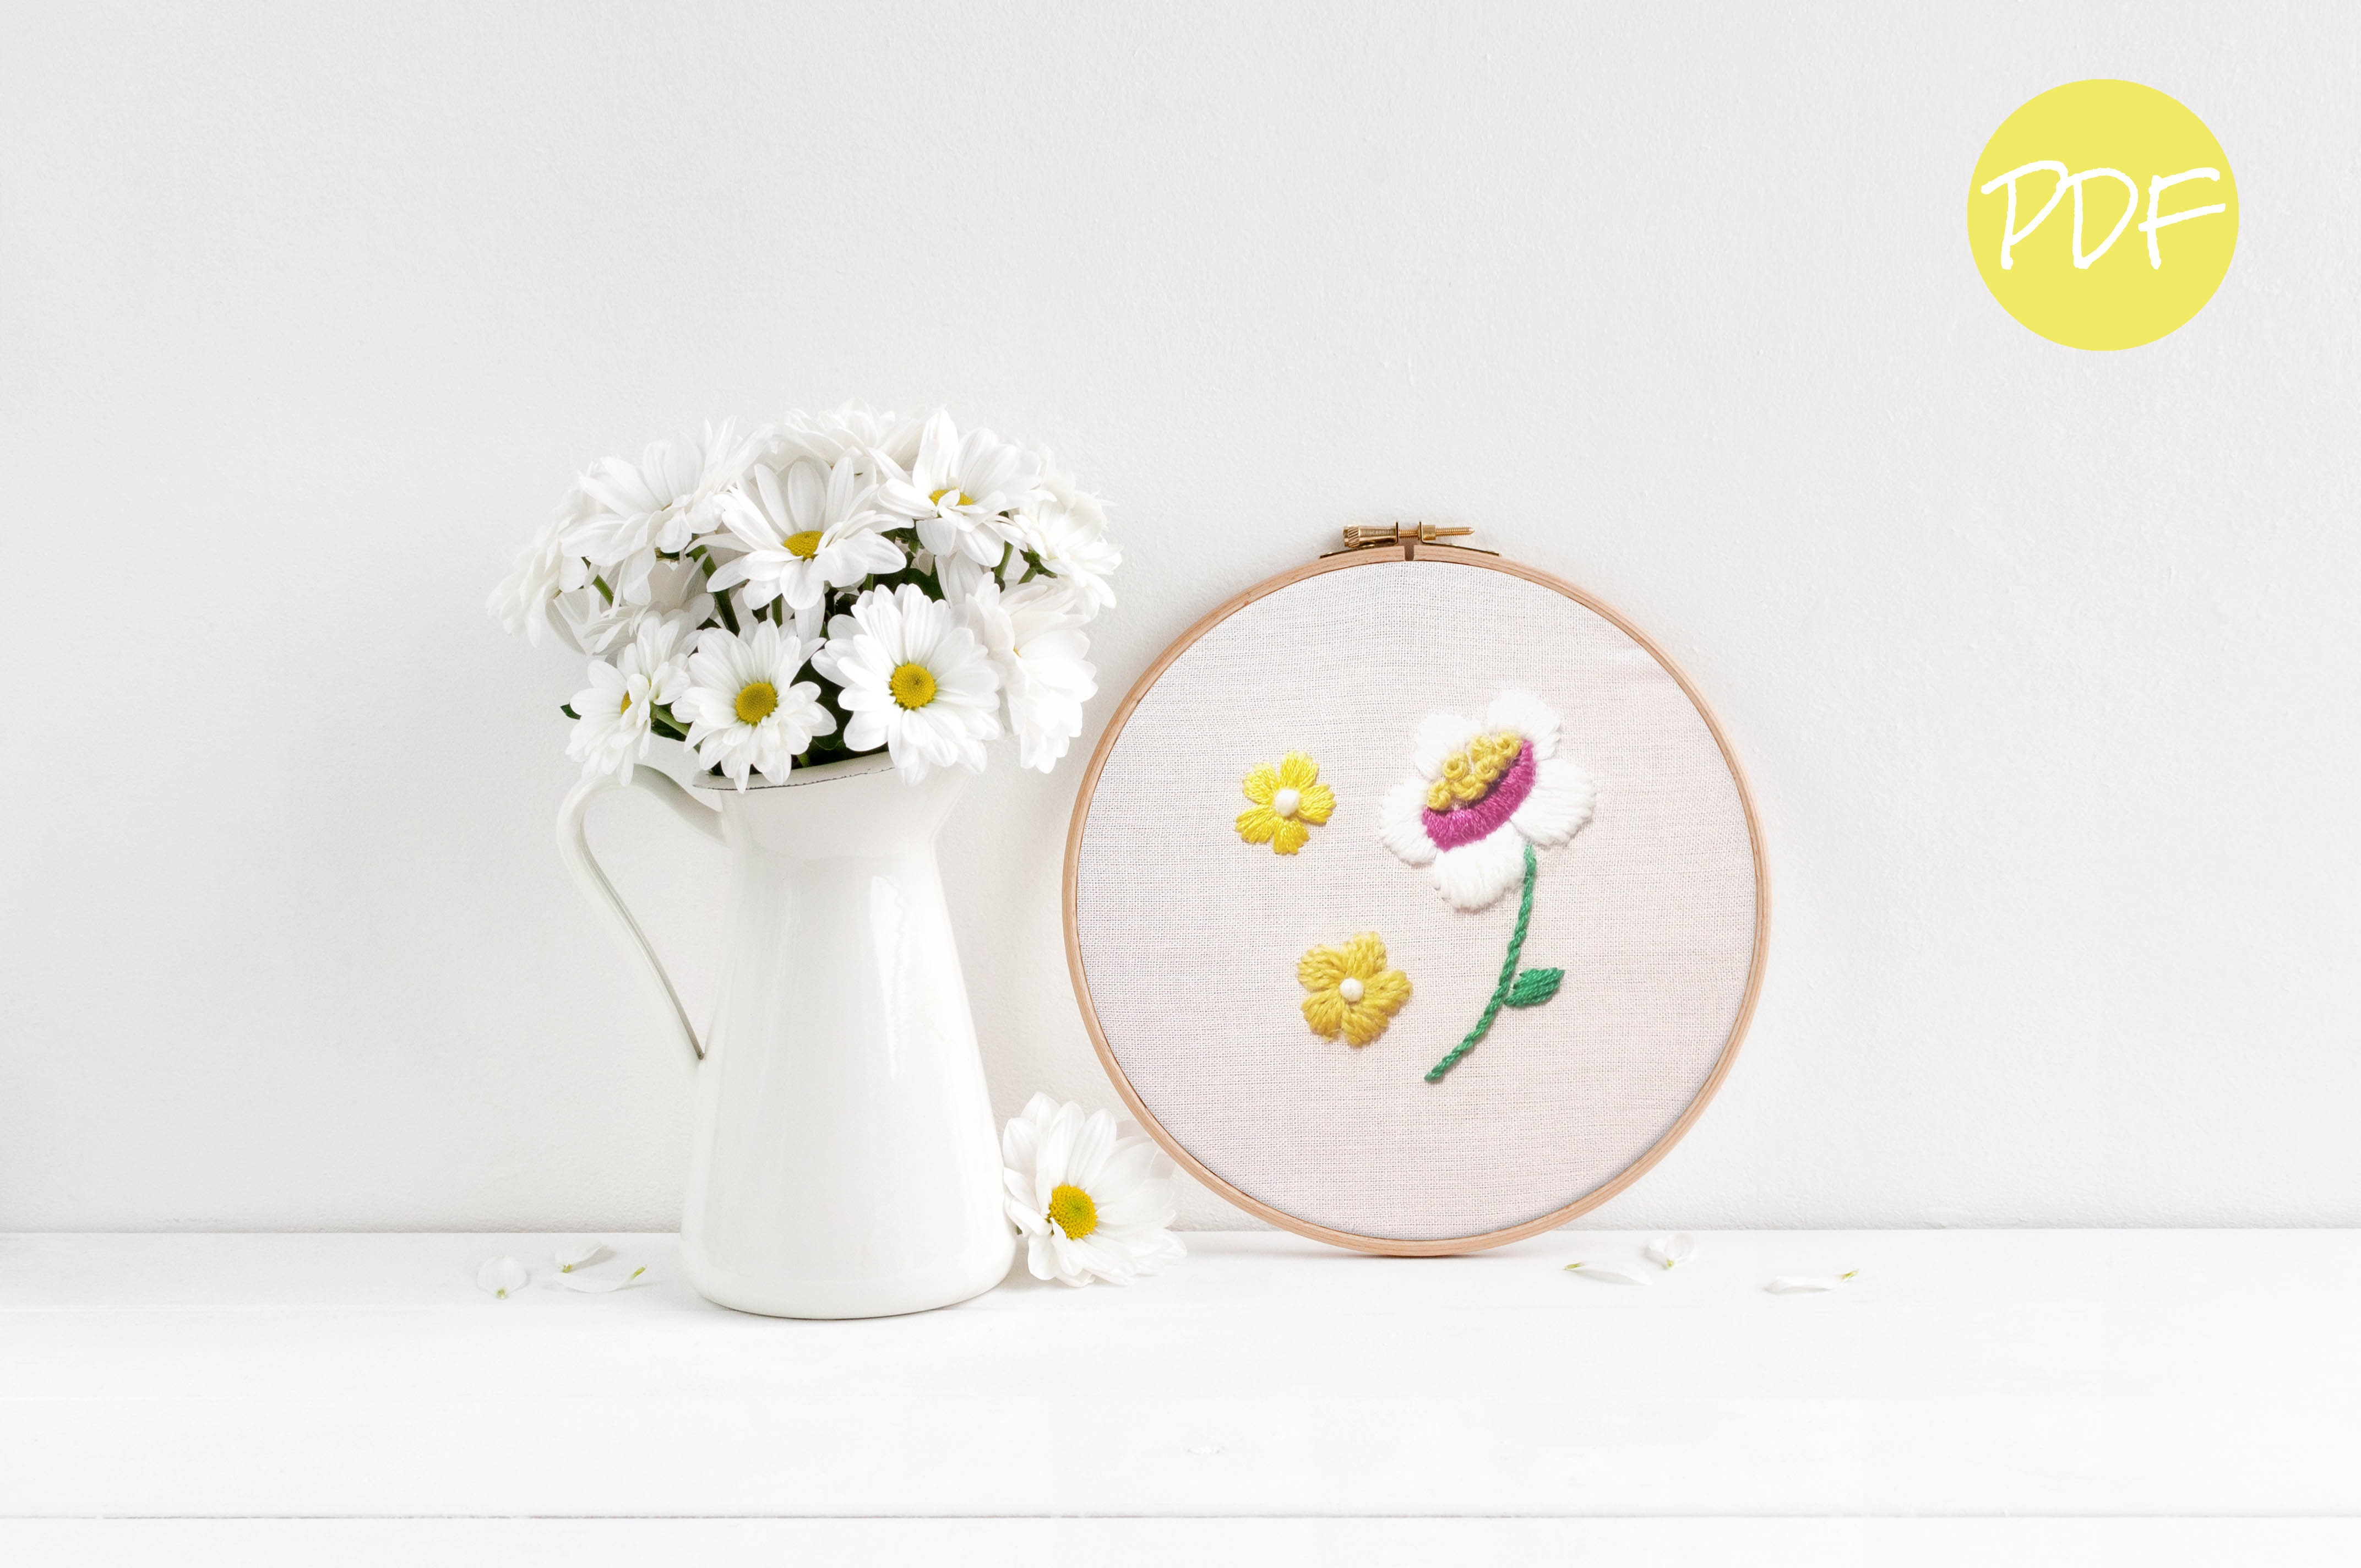 Flower Embroidery Pattern Vintage Daisies Floral Hand Embroidery Pattern